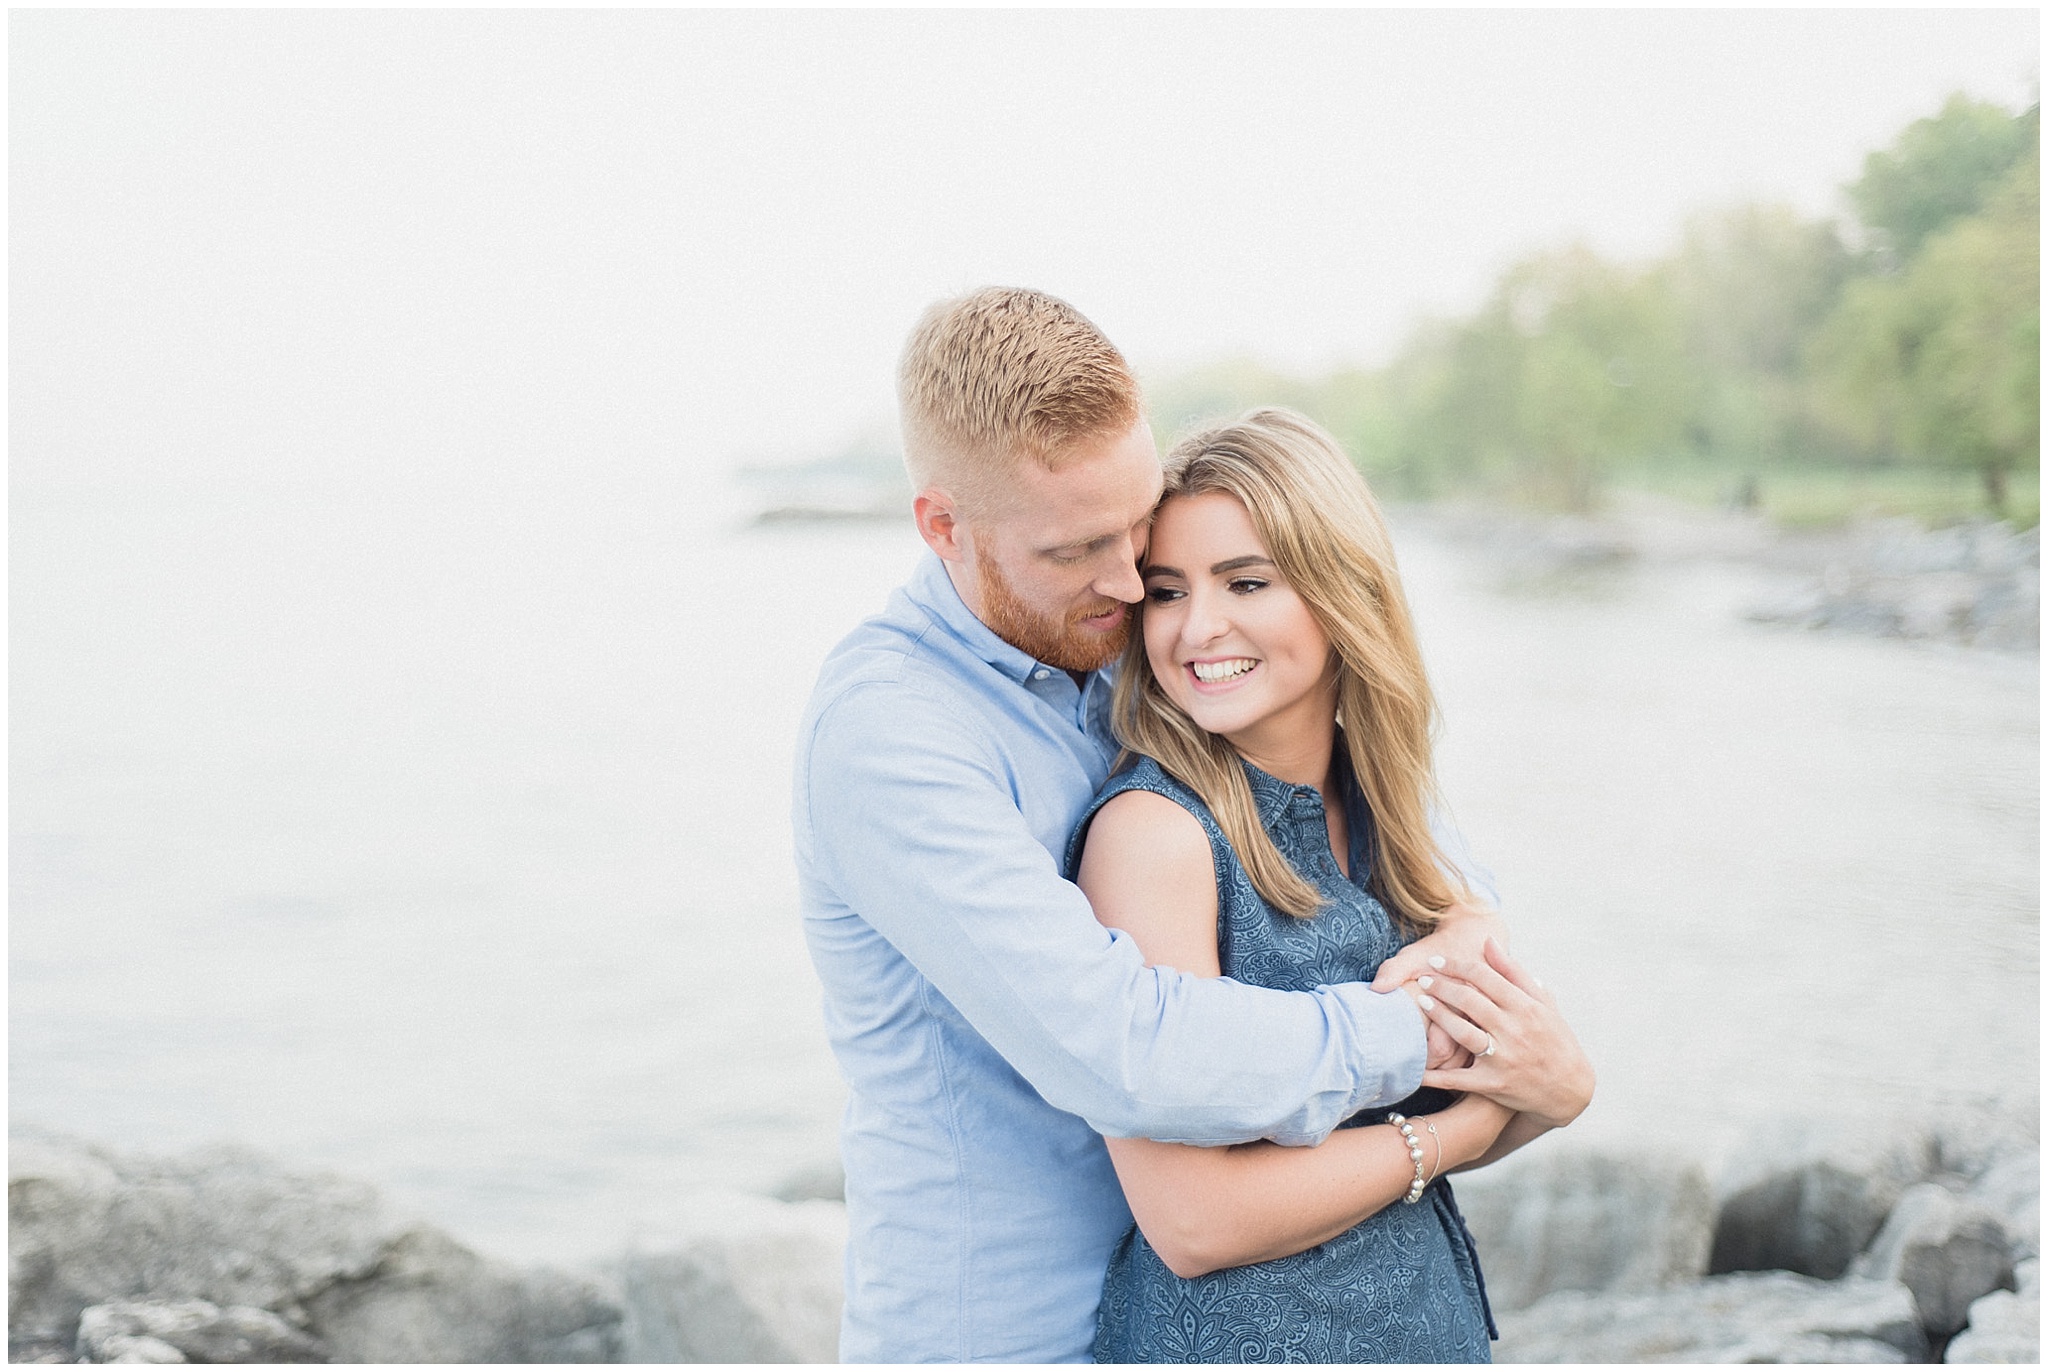 Lakeside Engagement Session by Jenn Kavanagh Photography